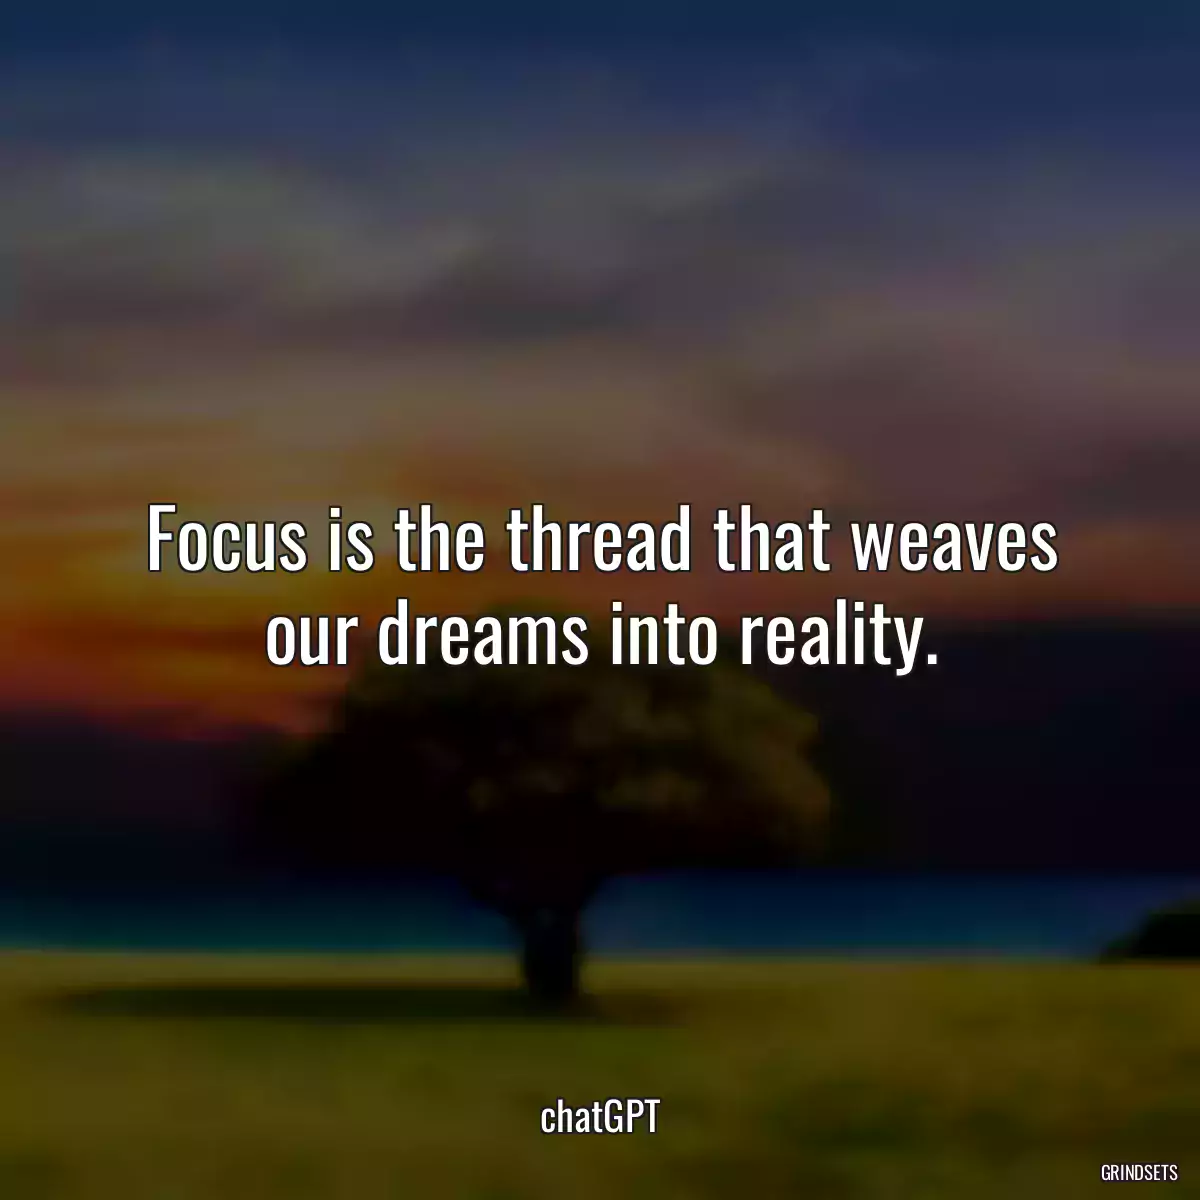 Focus is the thread that weaves our dreams into reality.